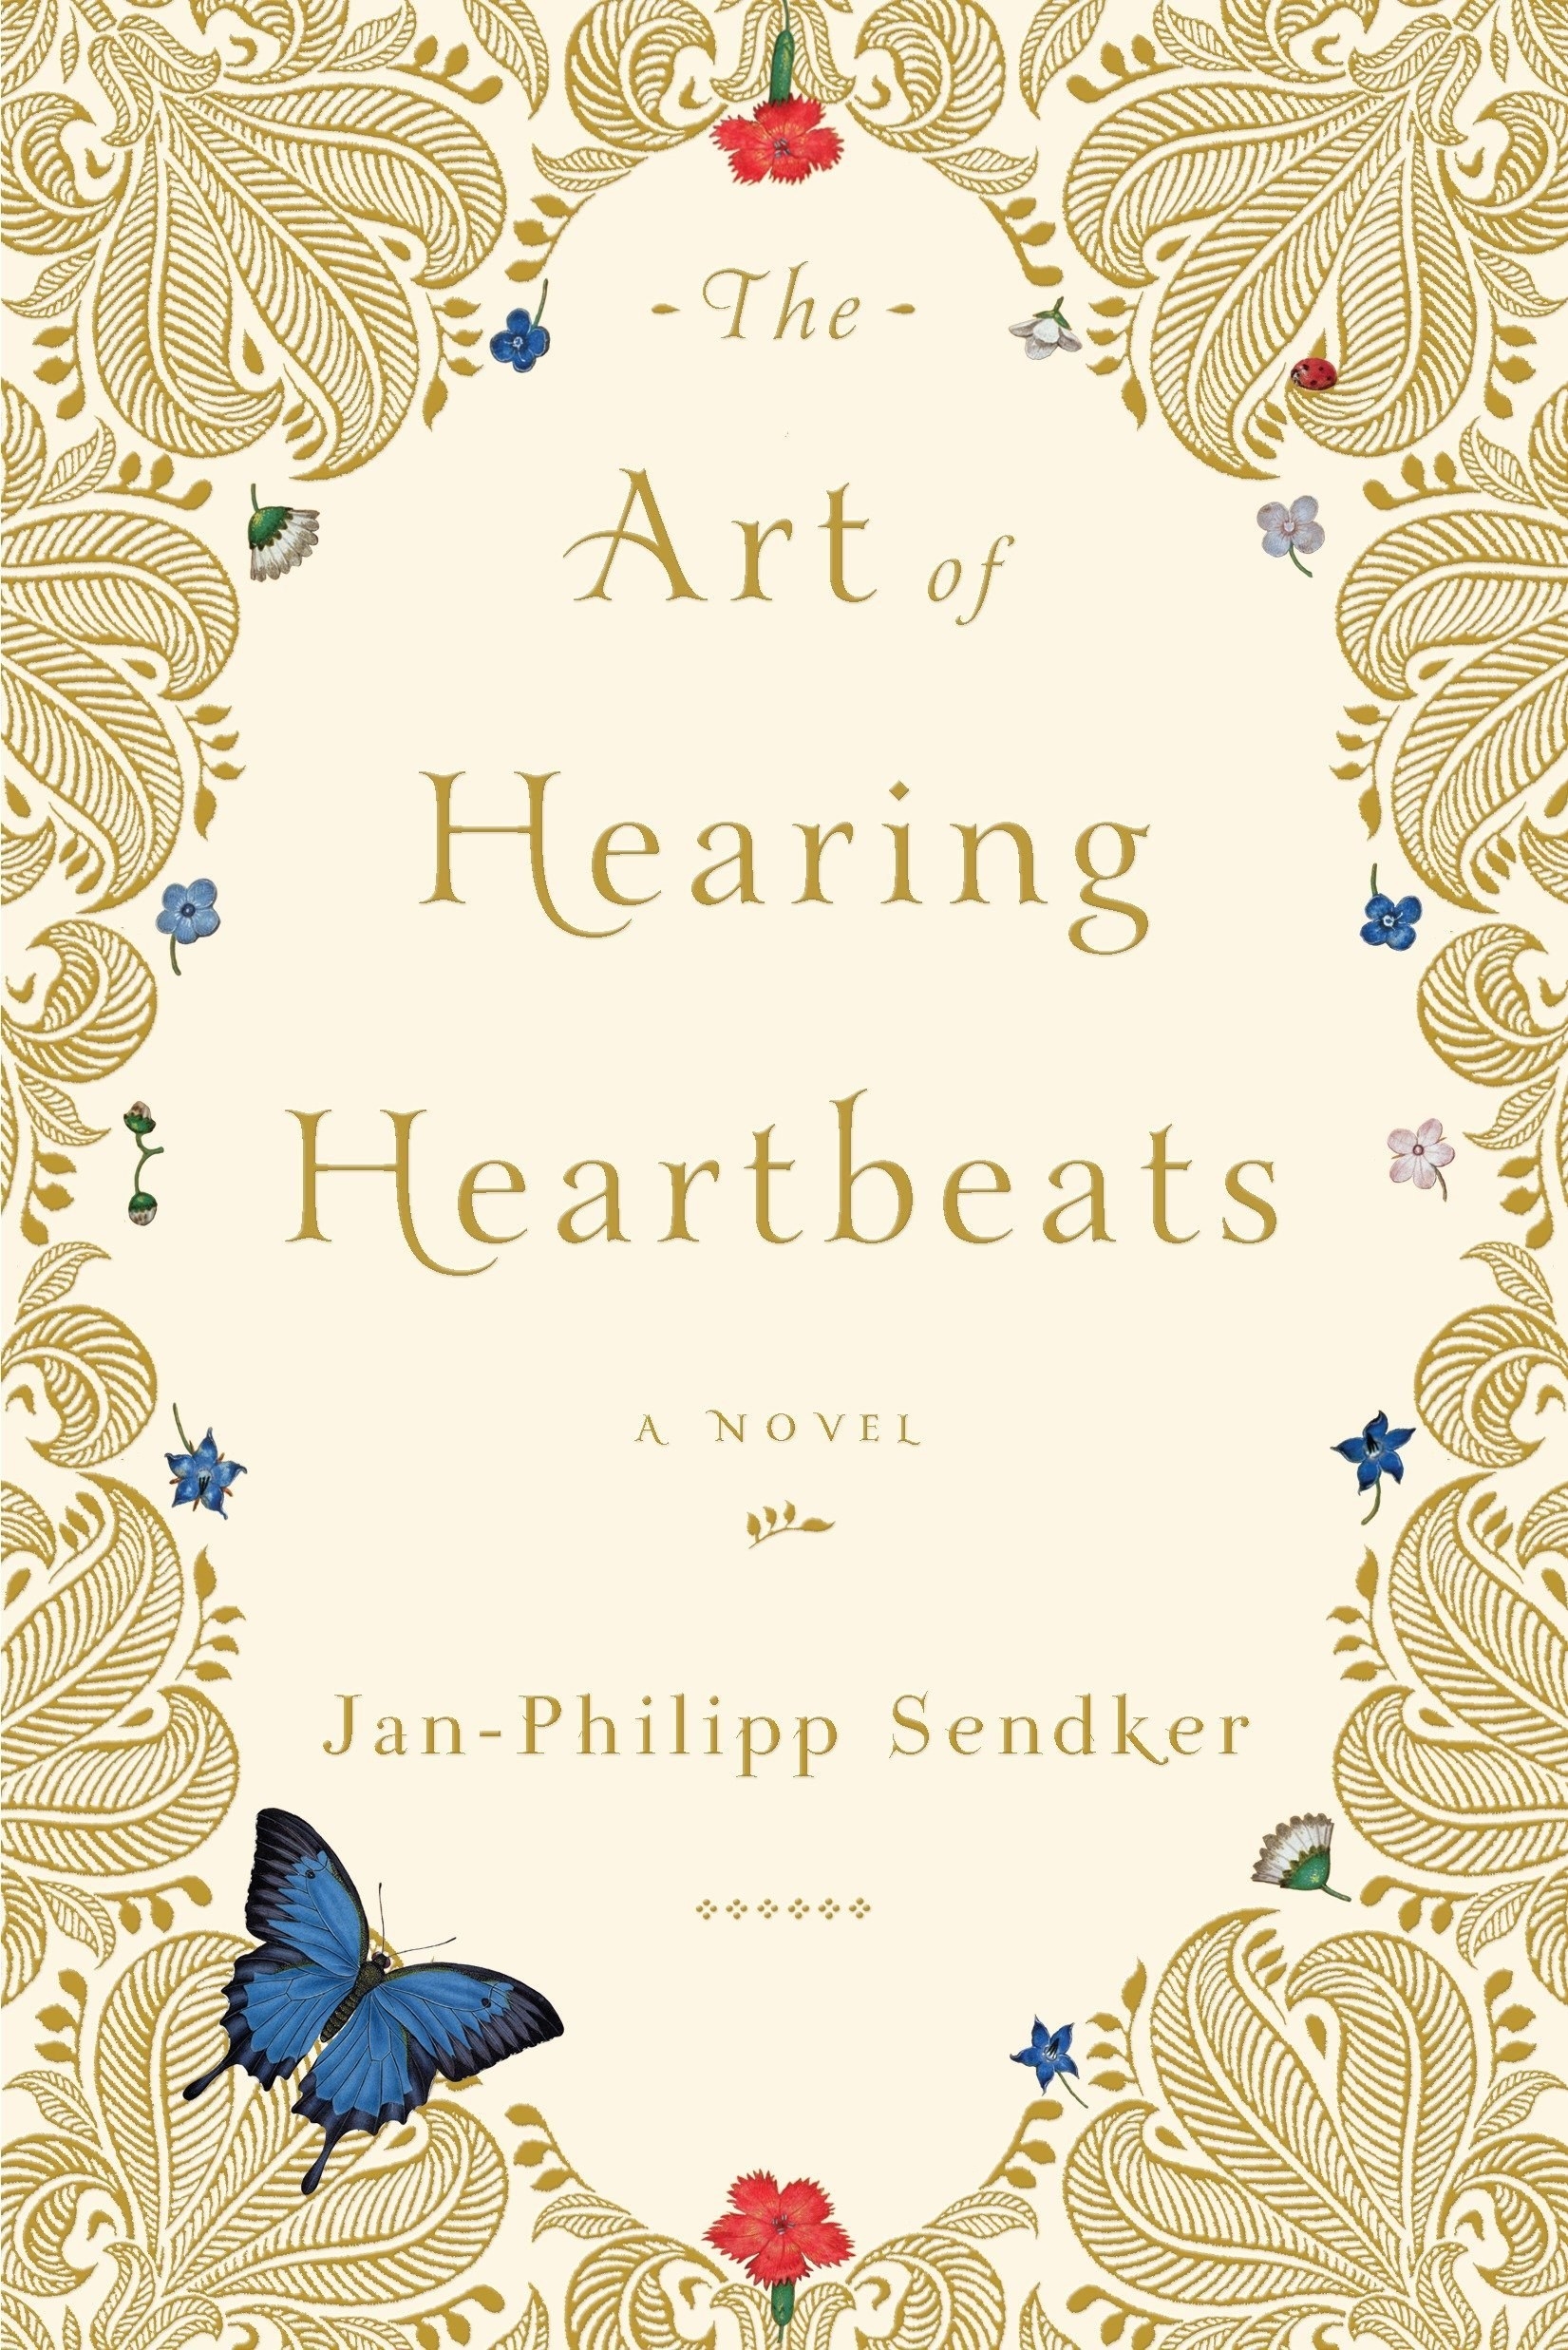 The cover of &quot;The Art of Hearing Heartbeats&quot; by Jan-Philipp Sendke.